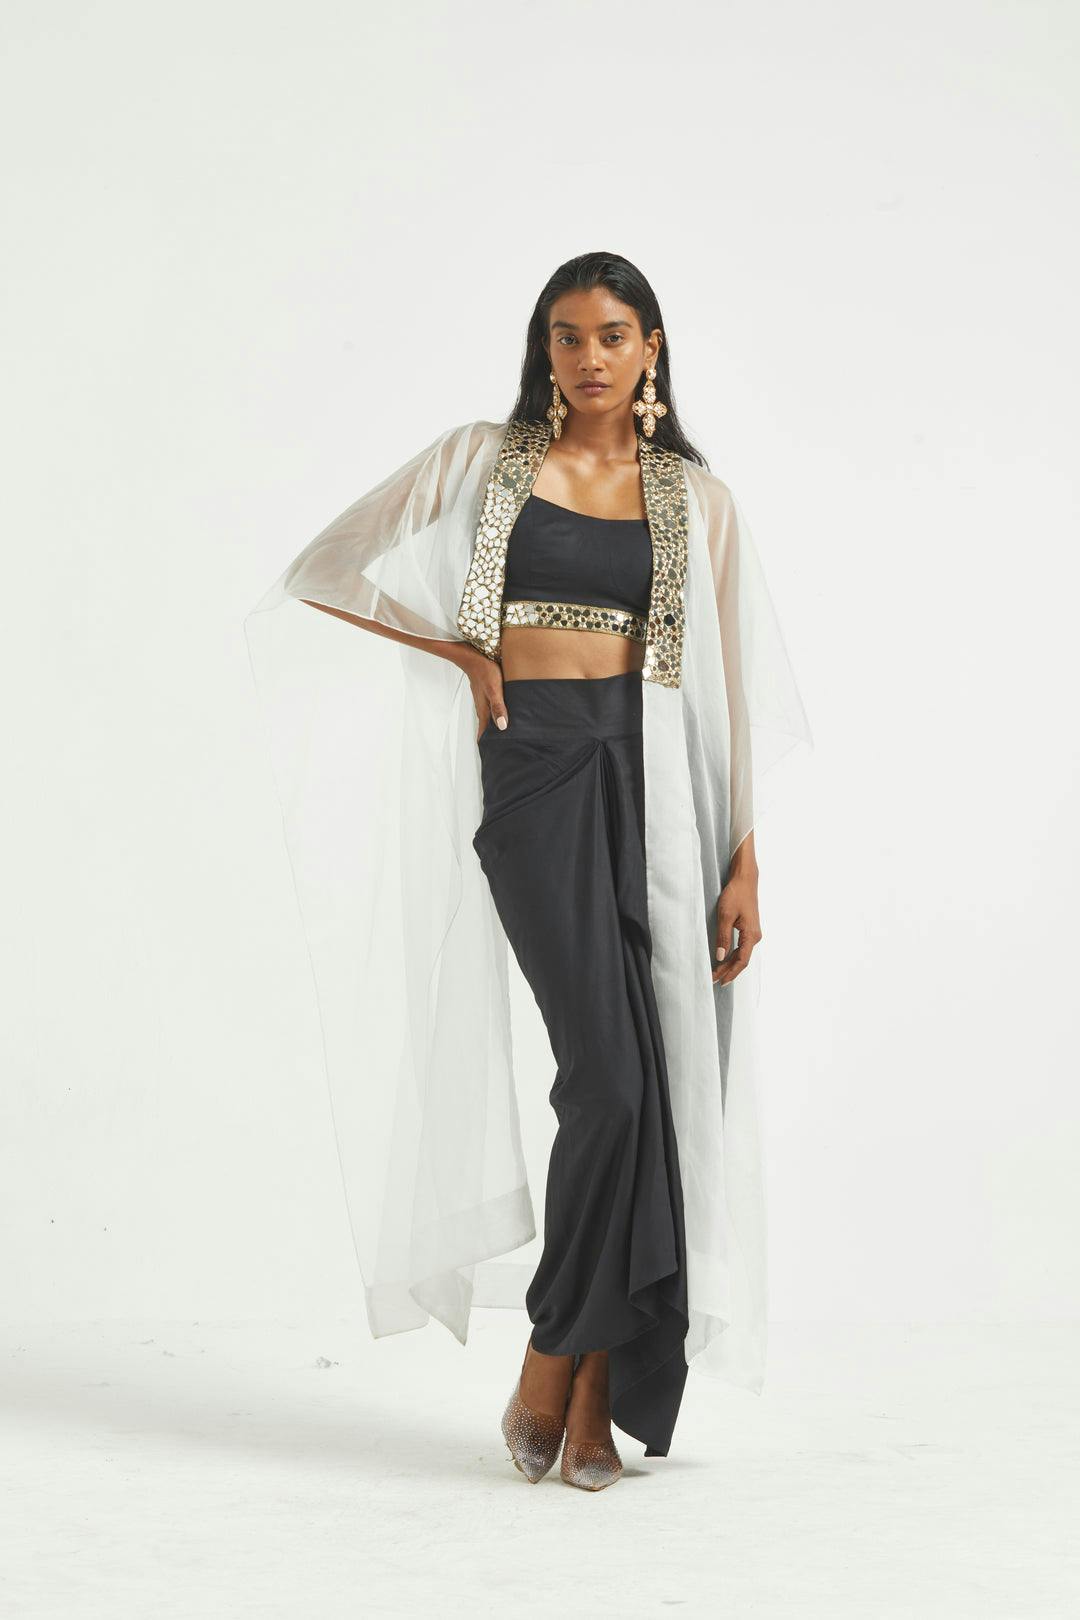 Mirror Bralette and Draped Skirt Set, a product by Dash & Dot